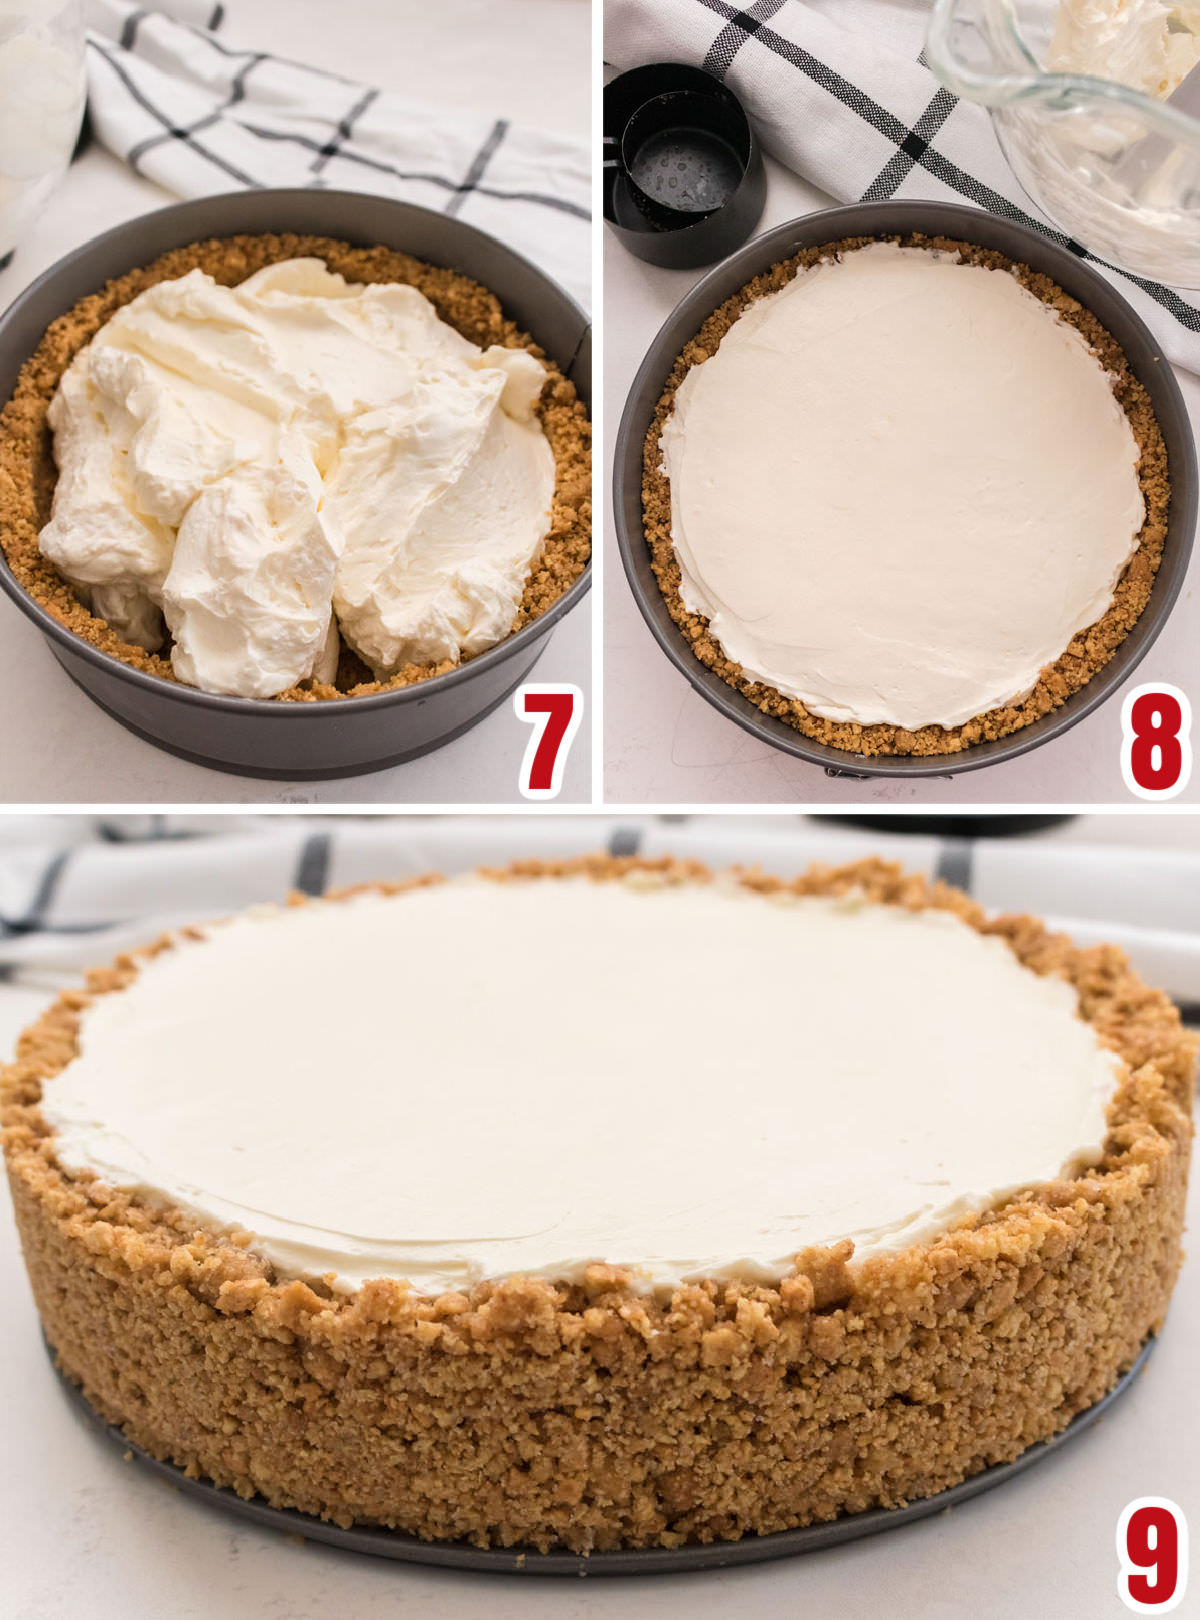 Collage image showing how to pour the cream cheese filling into the graham cracker crust.